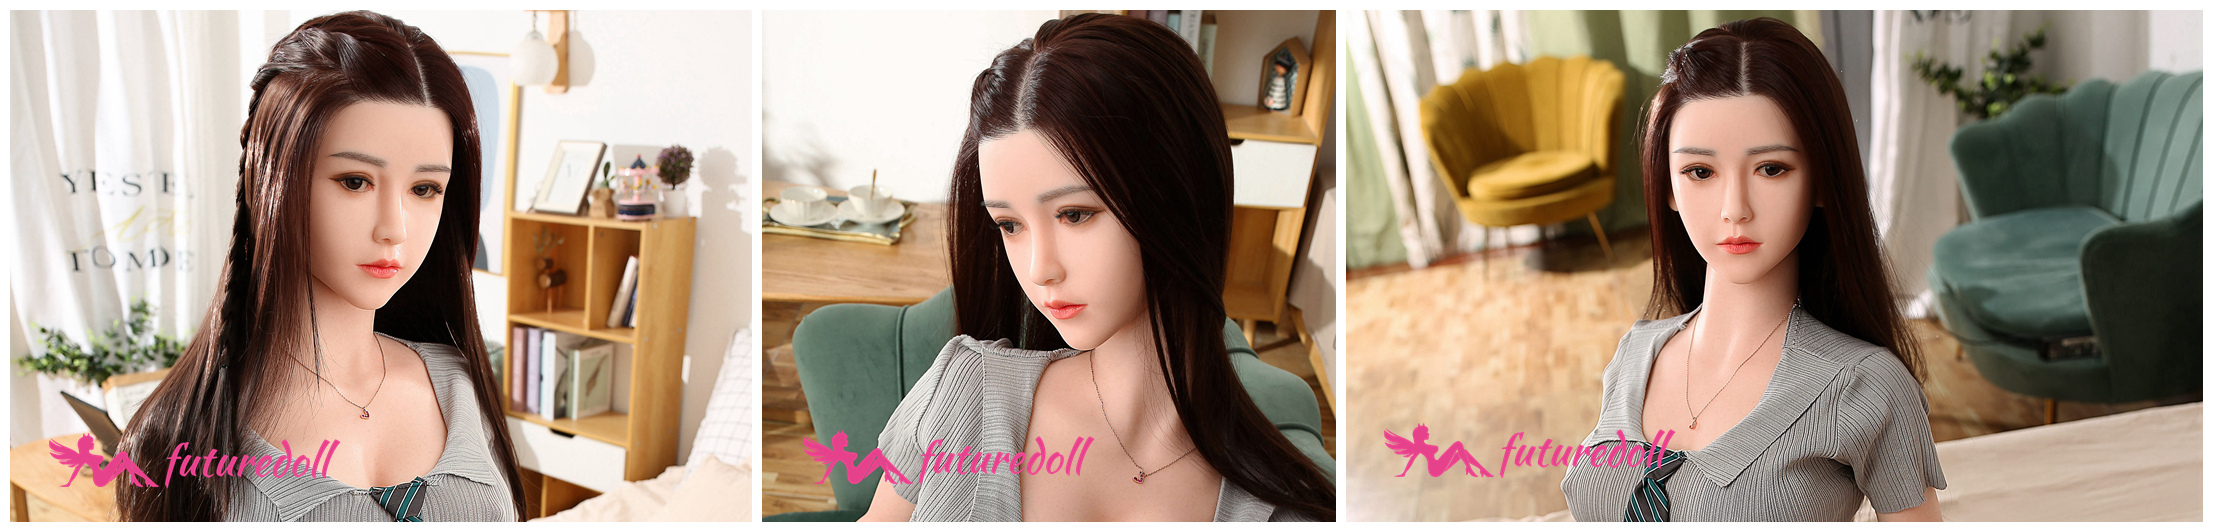 Premium Soft Silicone Doll Real Doll Asians Silicone Love Doll Future Doll 163cm Future Sex Doll Japanese Adult Doll Silicone Real Doll Asians Love Doll Future Doll 163cm Japanese Adult Doll